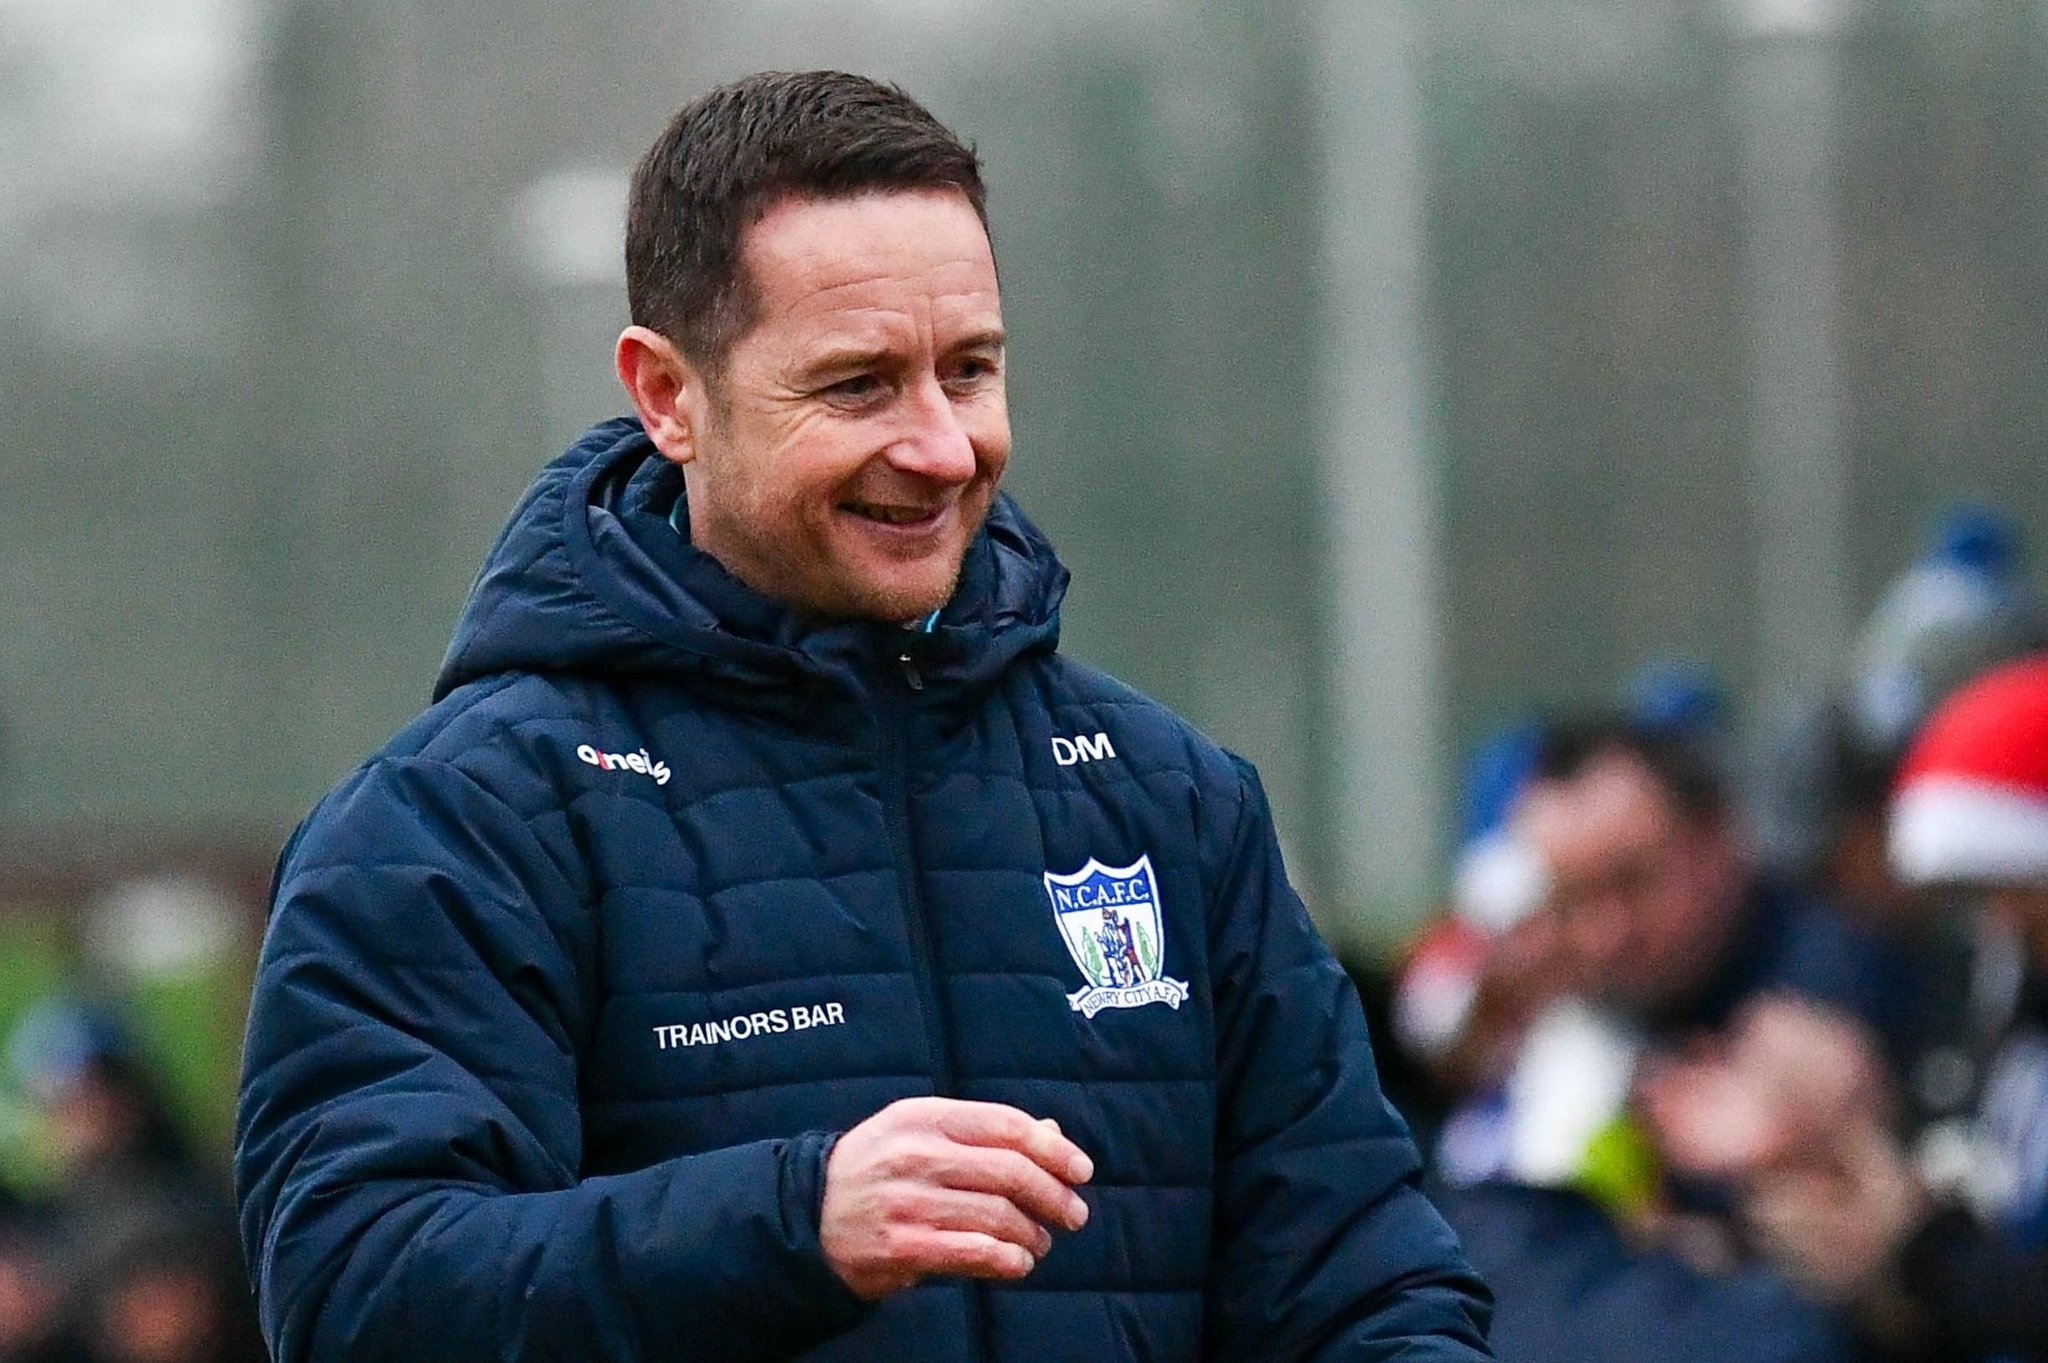 Newry City inspired by title pressure as Irish Cup underdogs against Ballymena